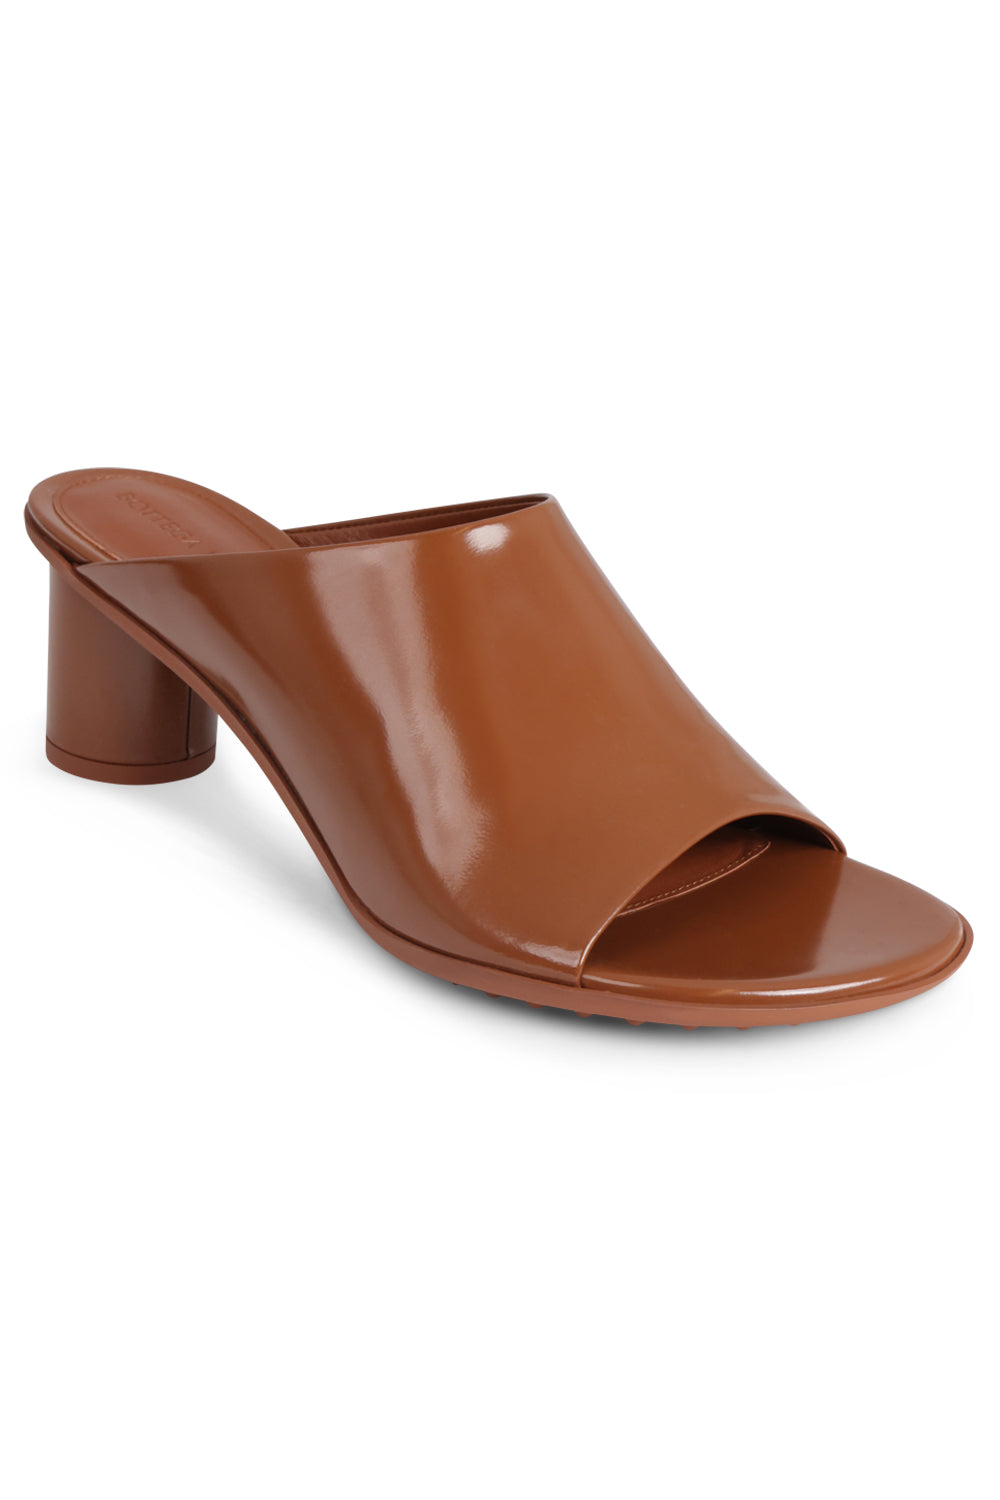 Designer Heeled Leather Mules For Women Stylish, Luxurious & Versatile  Sandals For Outdoor Beach & Casual Wear From Egqv, $72.66 | DHgate.Com